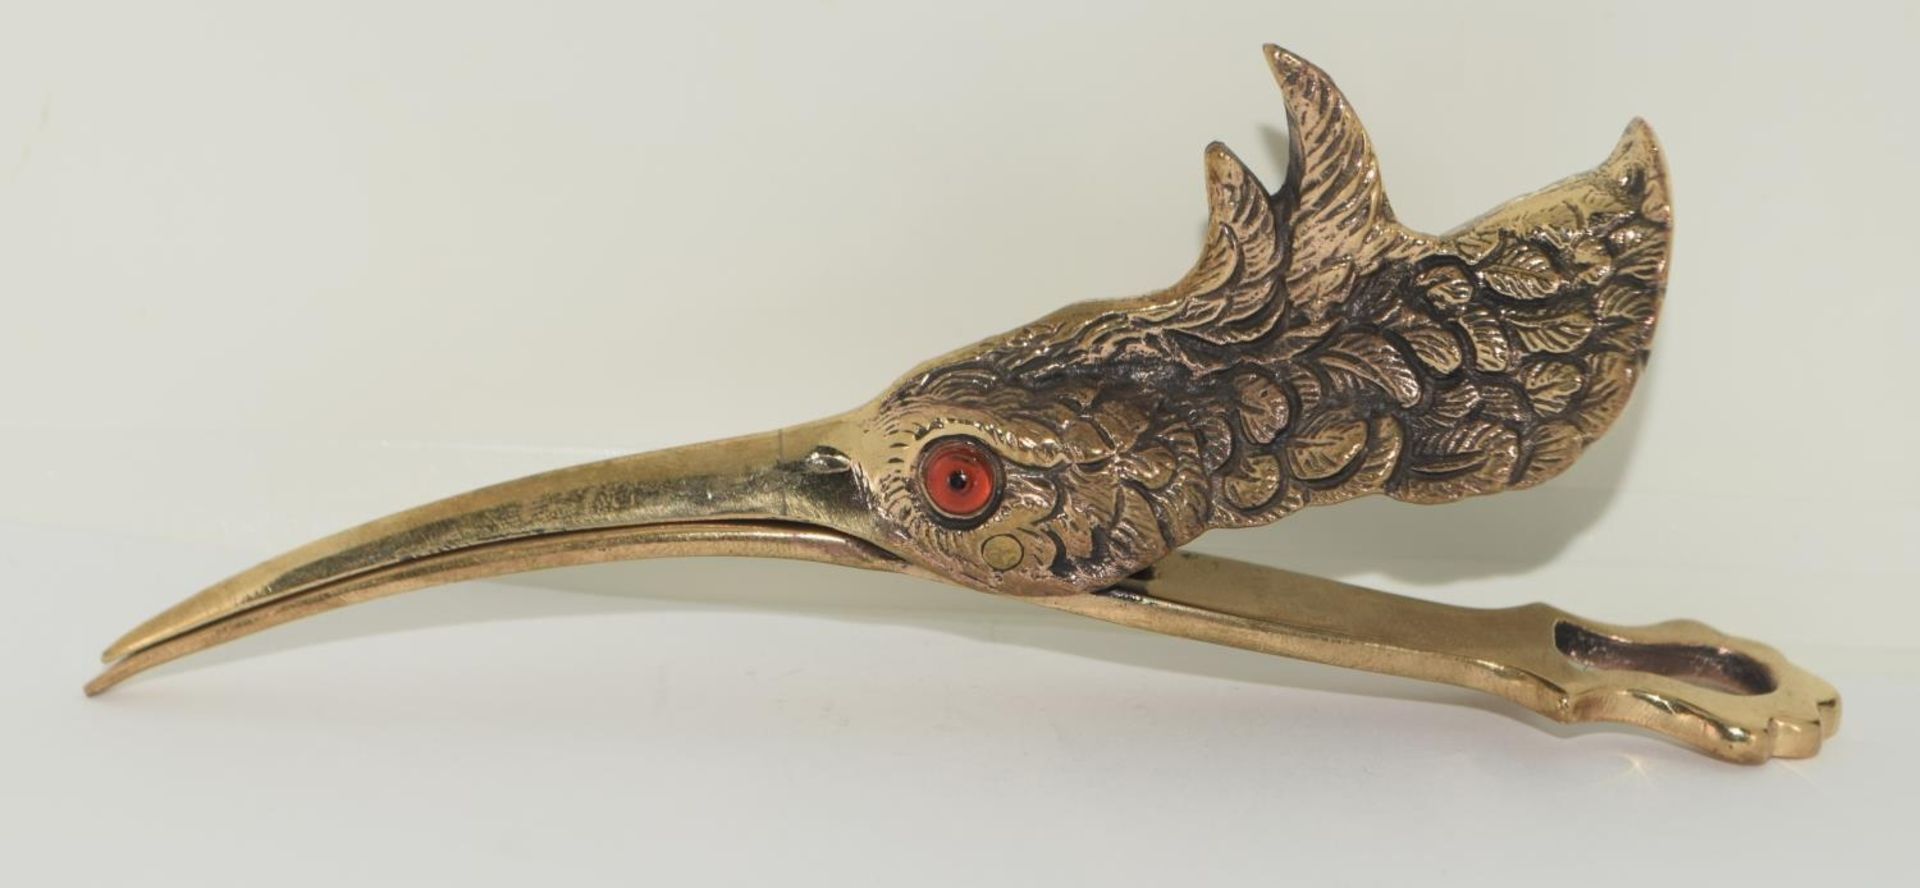 An unusual brass document holder in the form of a waterbird.